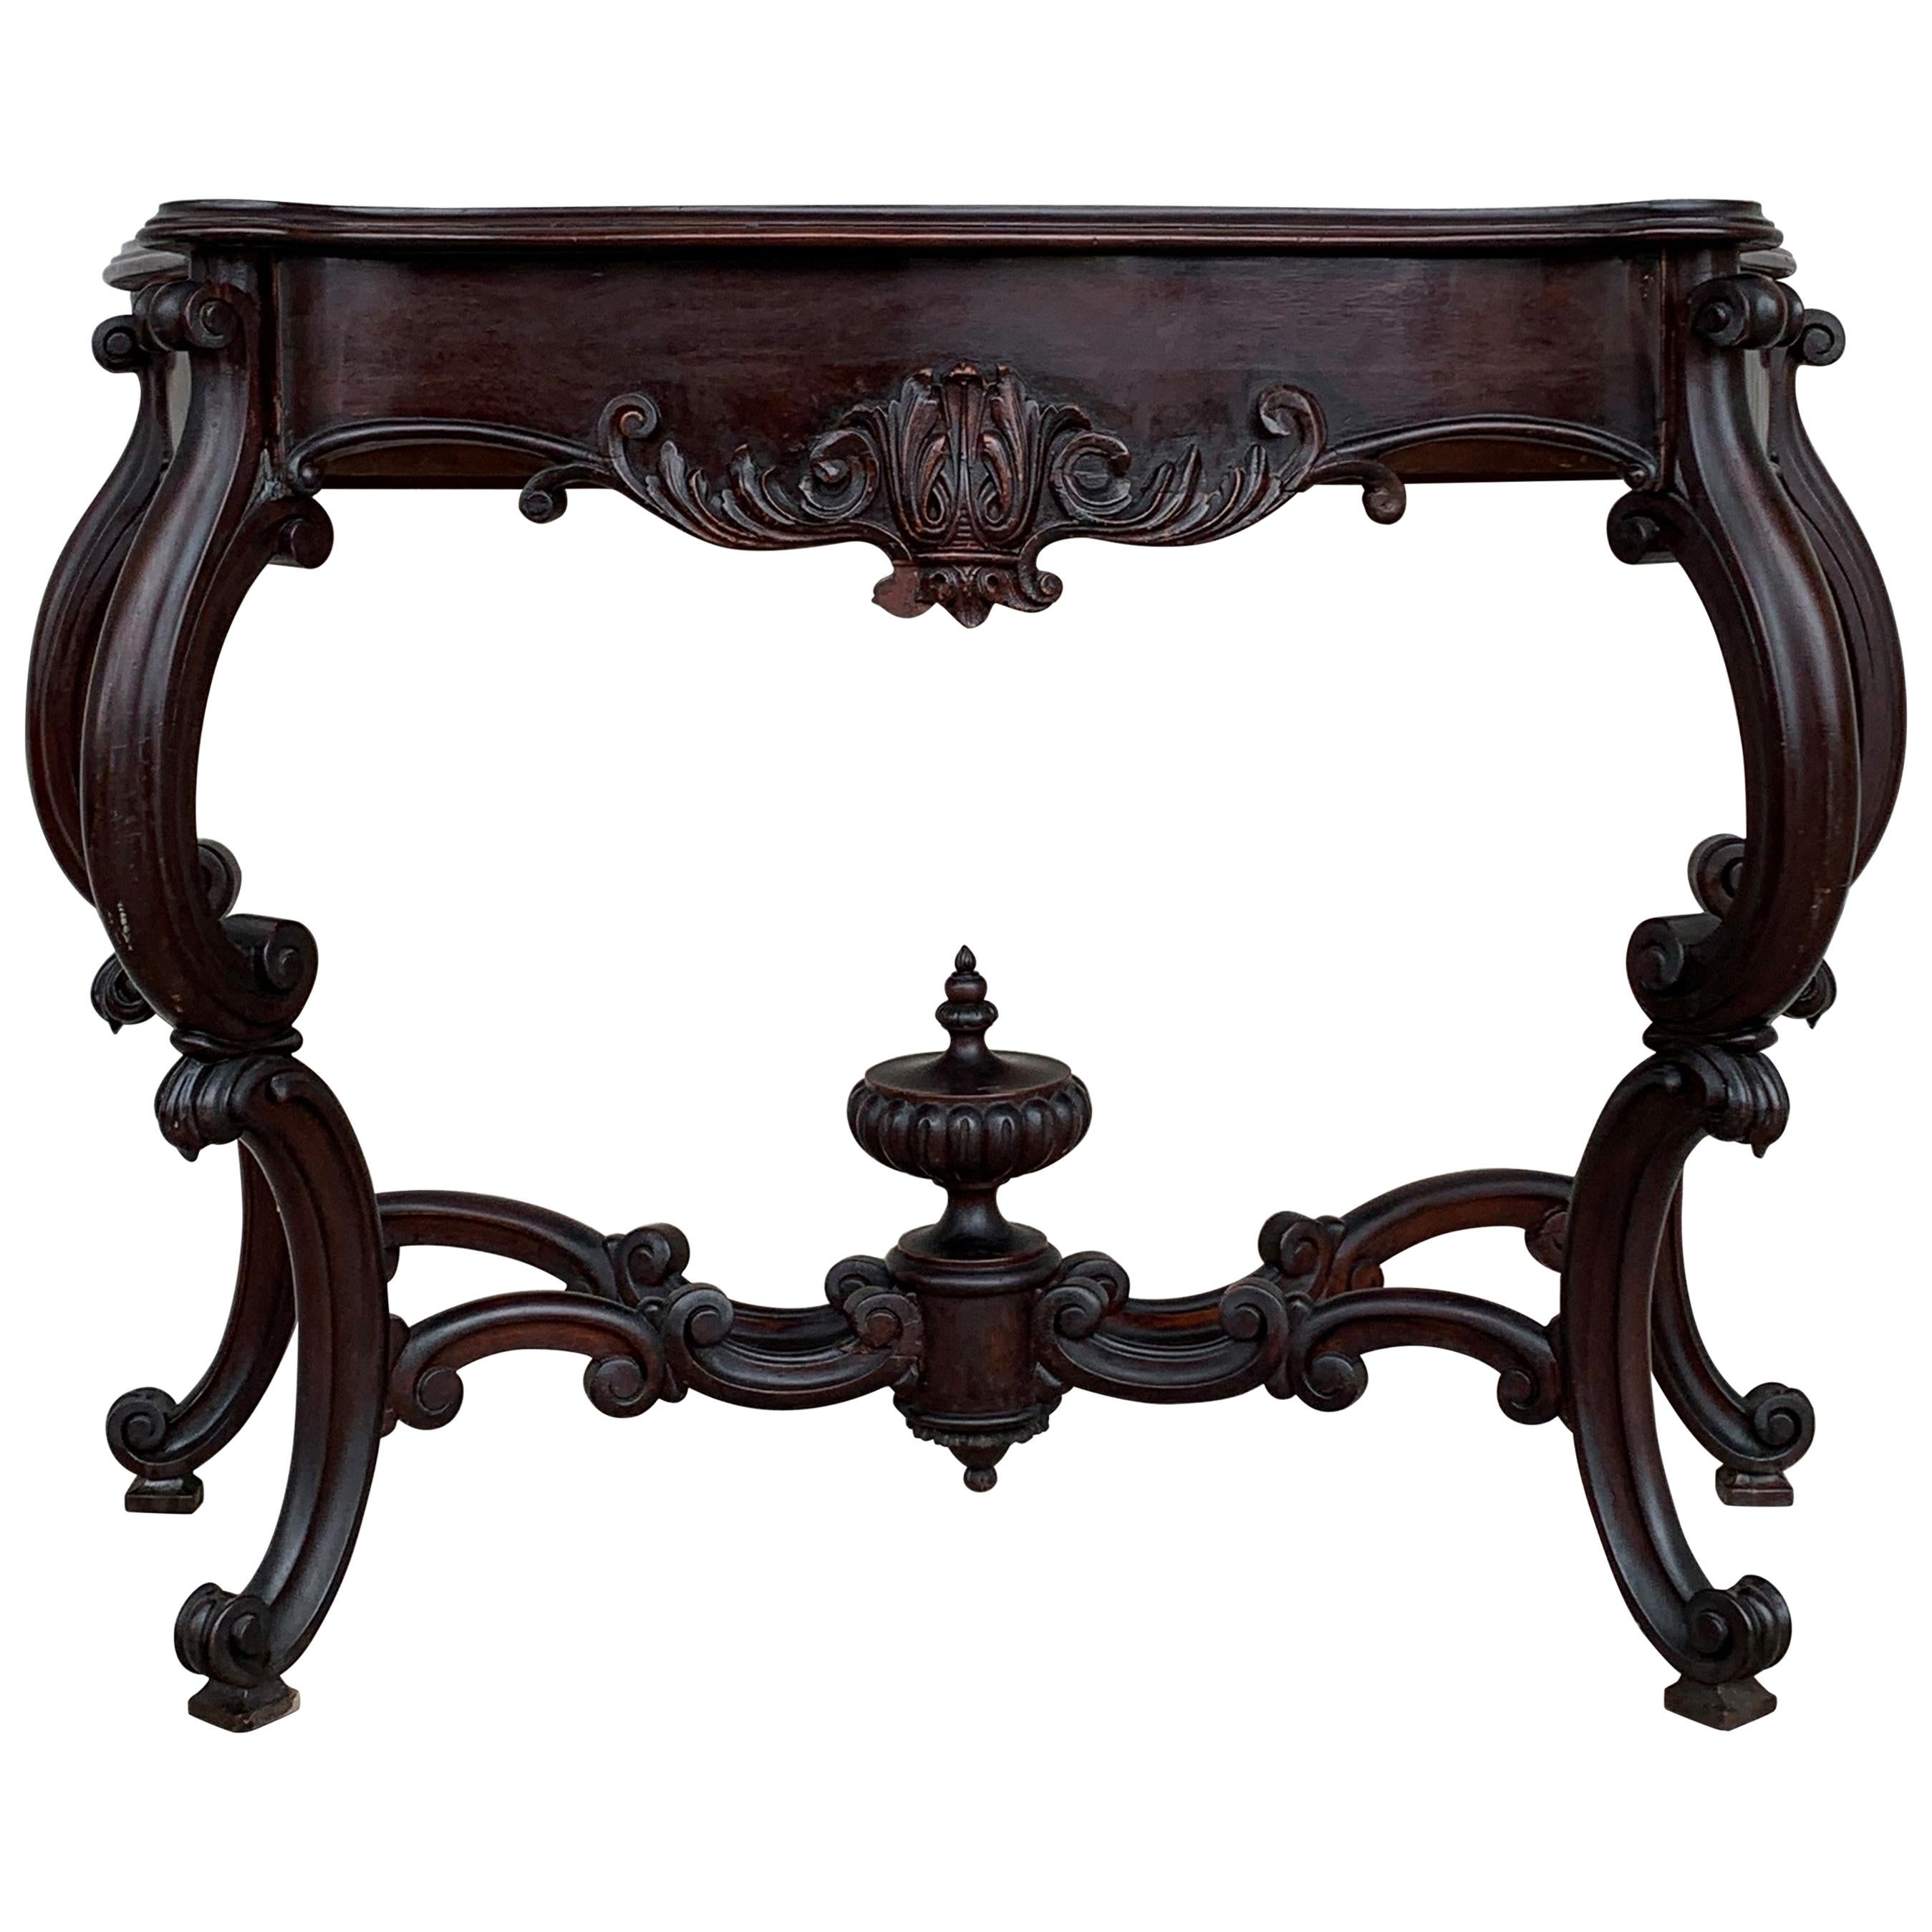 20th Century French Regency Carved Walnut Console Table with Drawer